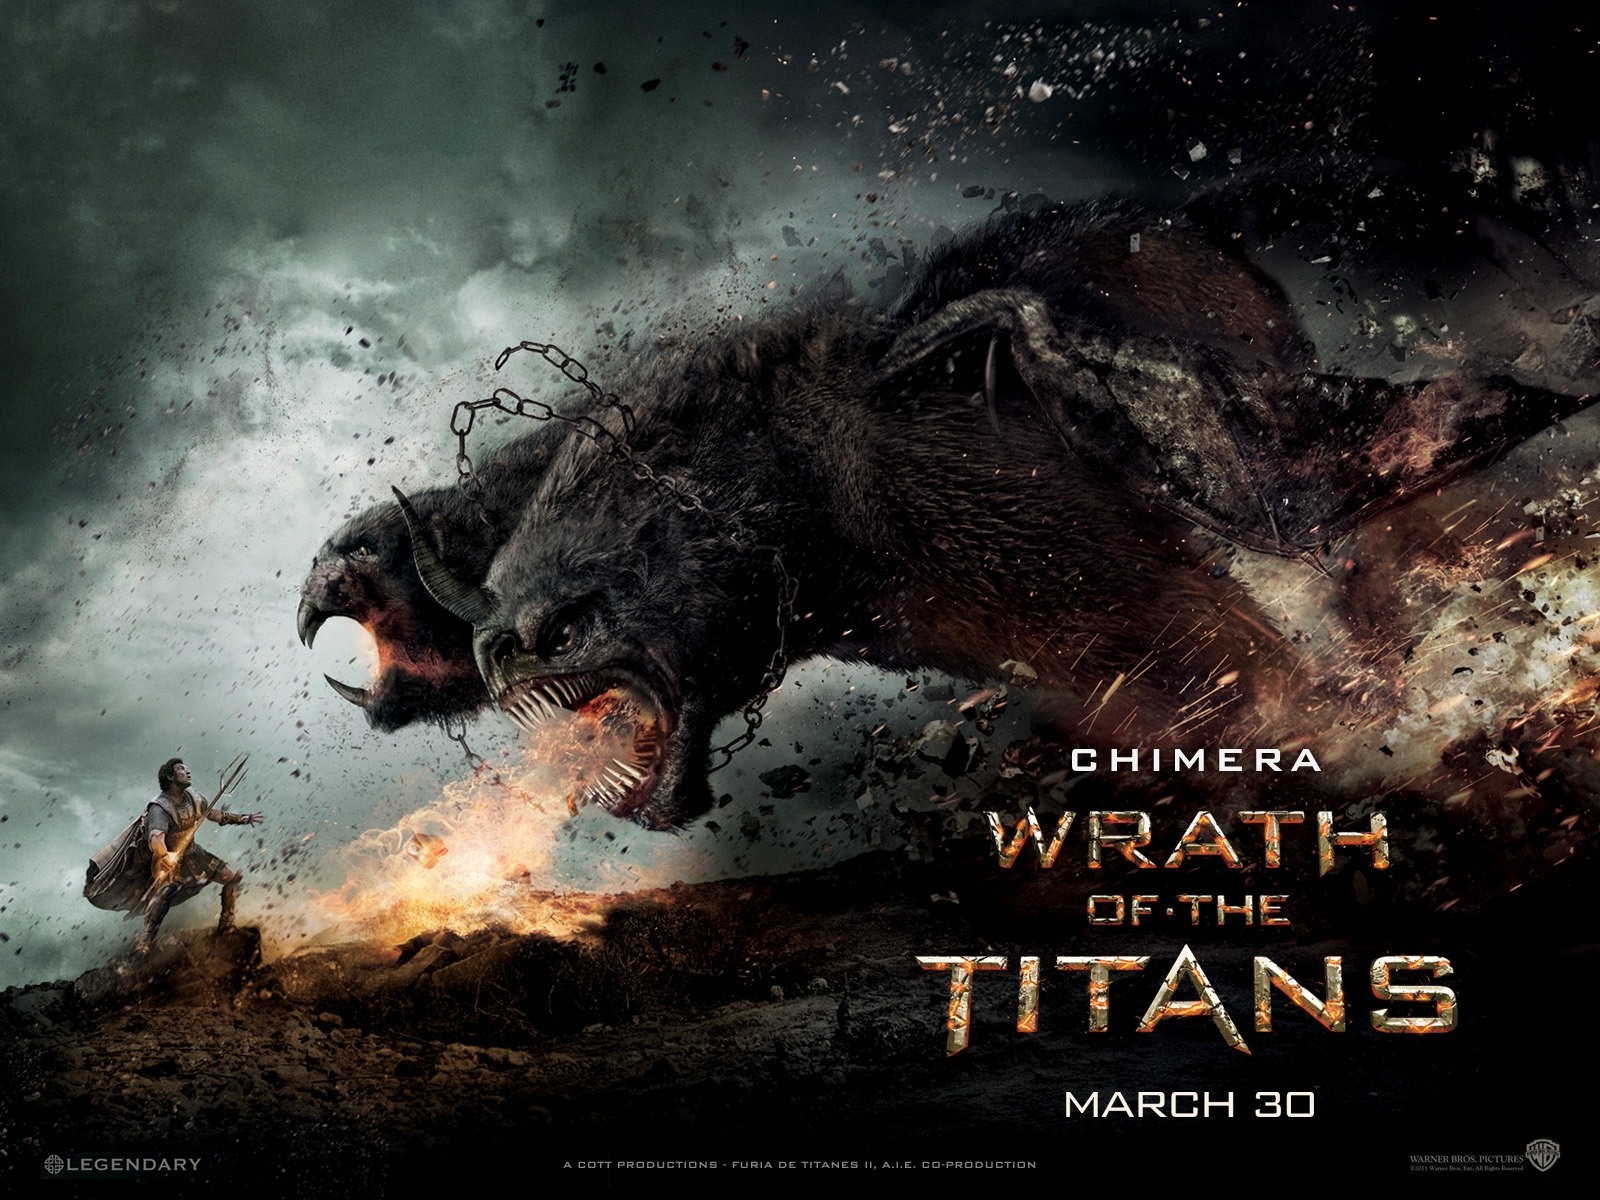 Chimera Wrath of the Titans for 1600 x 1200 resolution